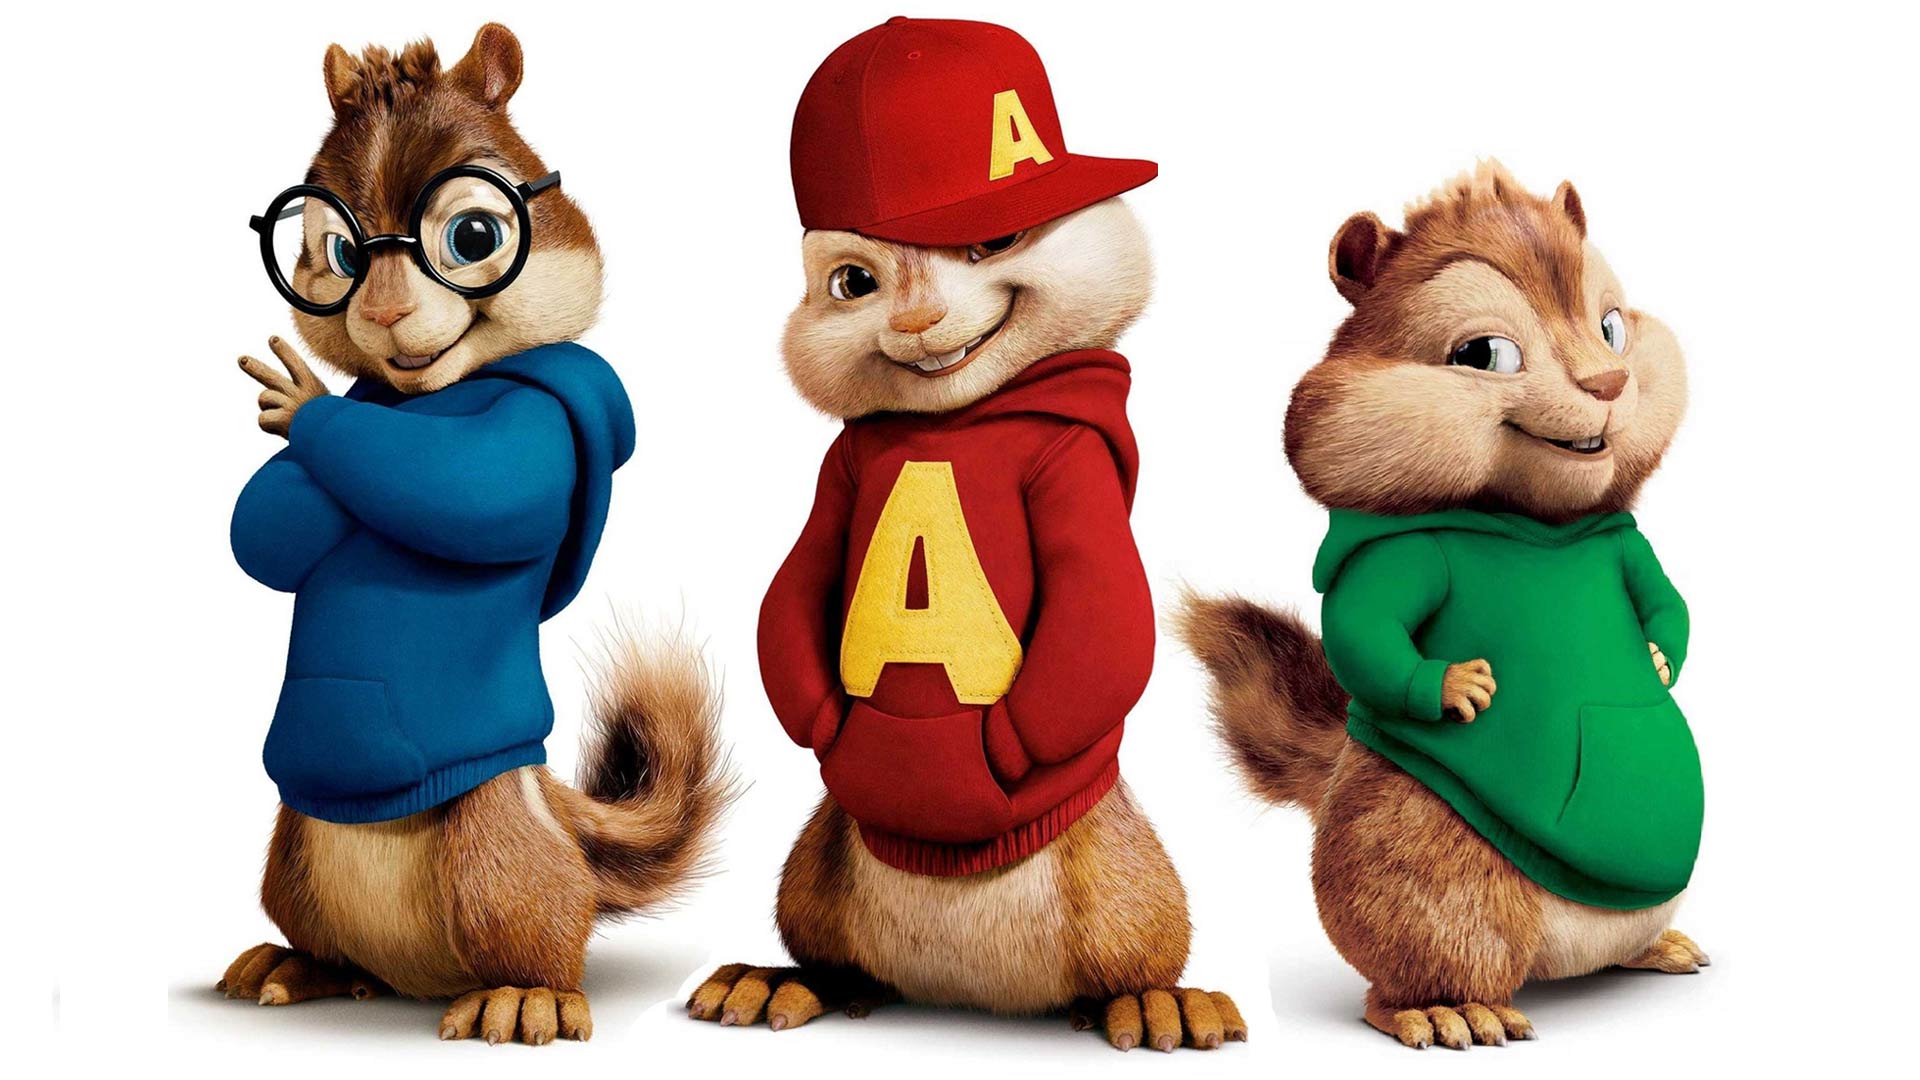 Movie Madness: "Alvin and the Chipmunks" is showing March 23.